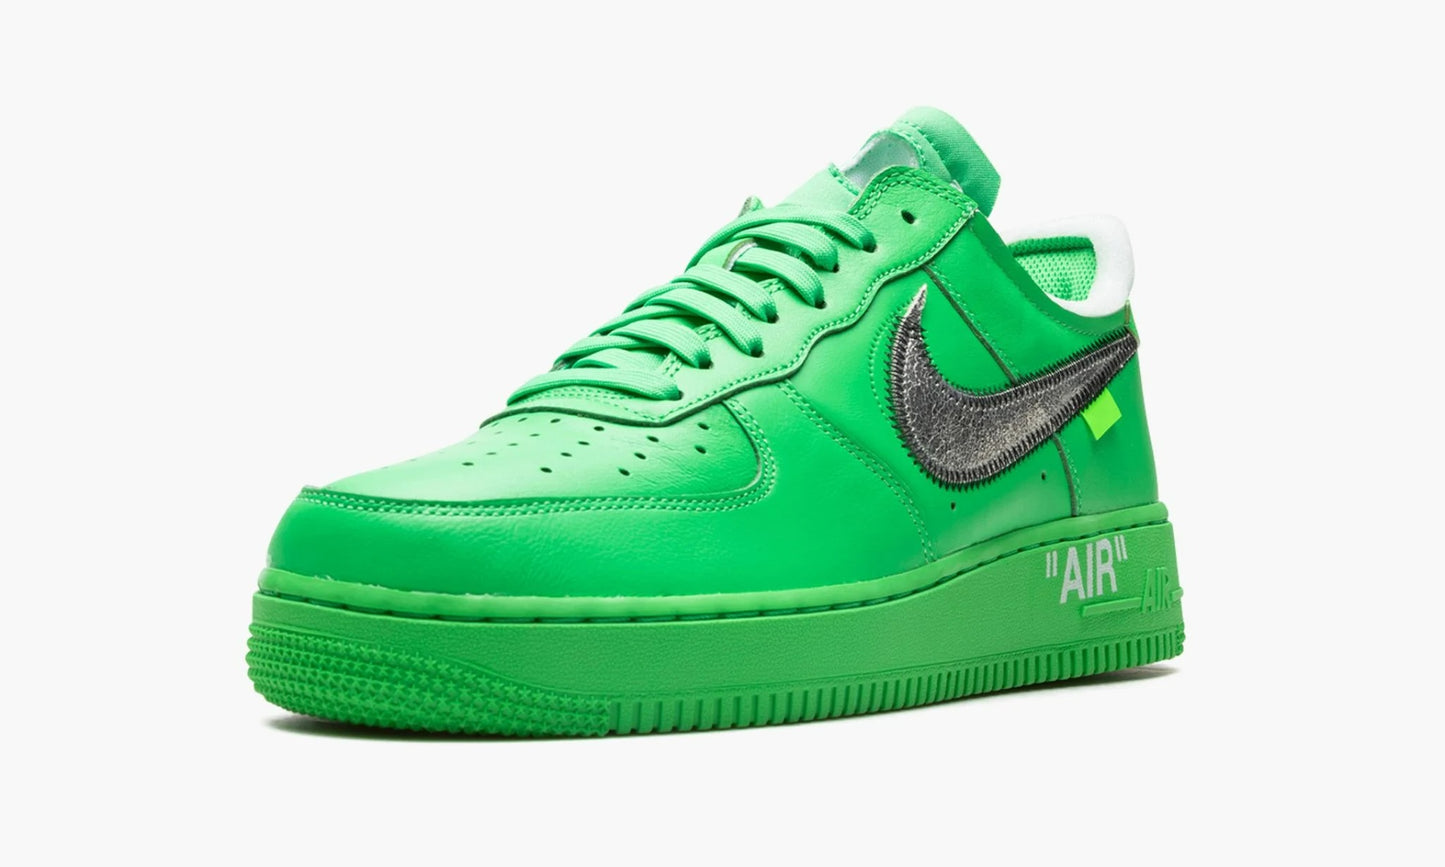 Air Force 1 Low Off-White Brooklyn - DX1419 300 | The Sortage